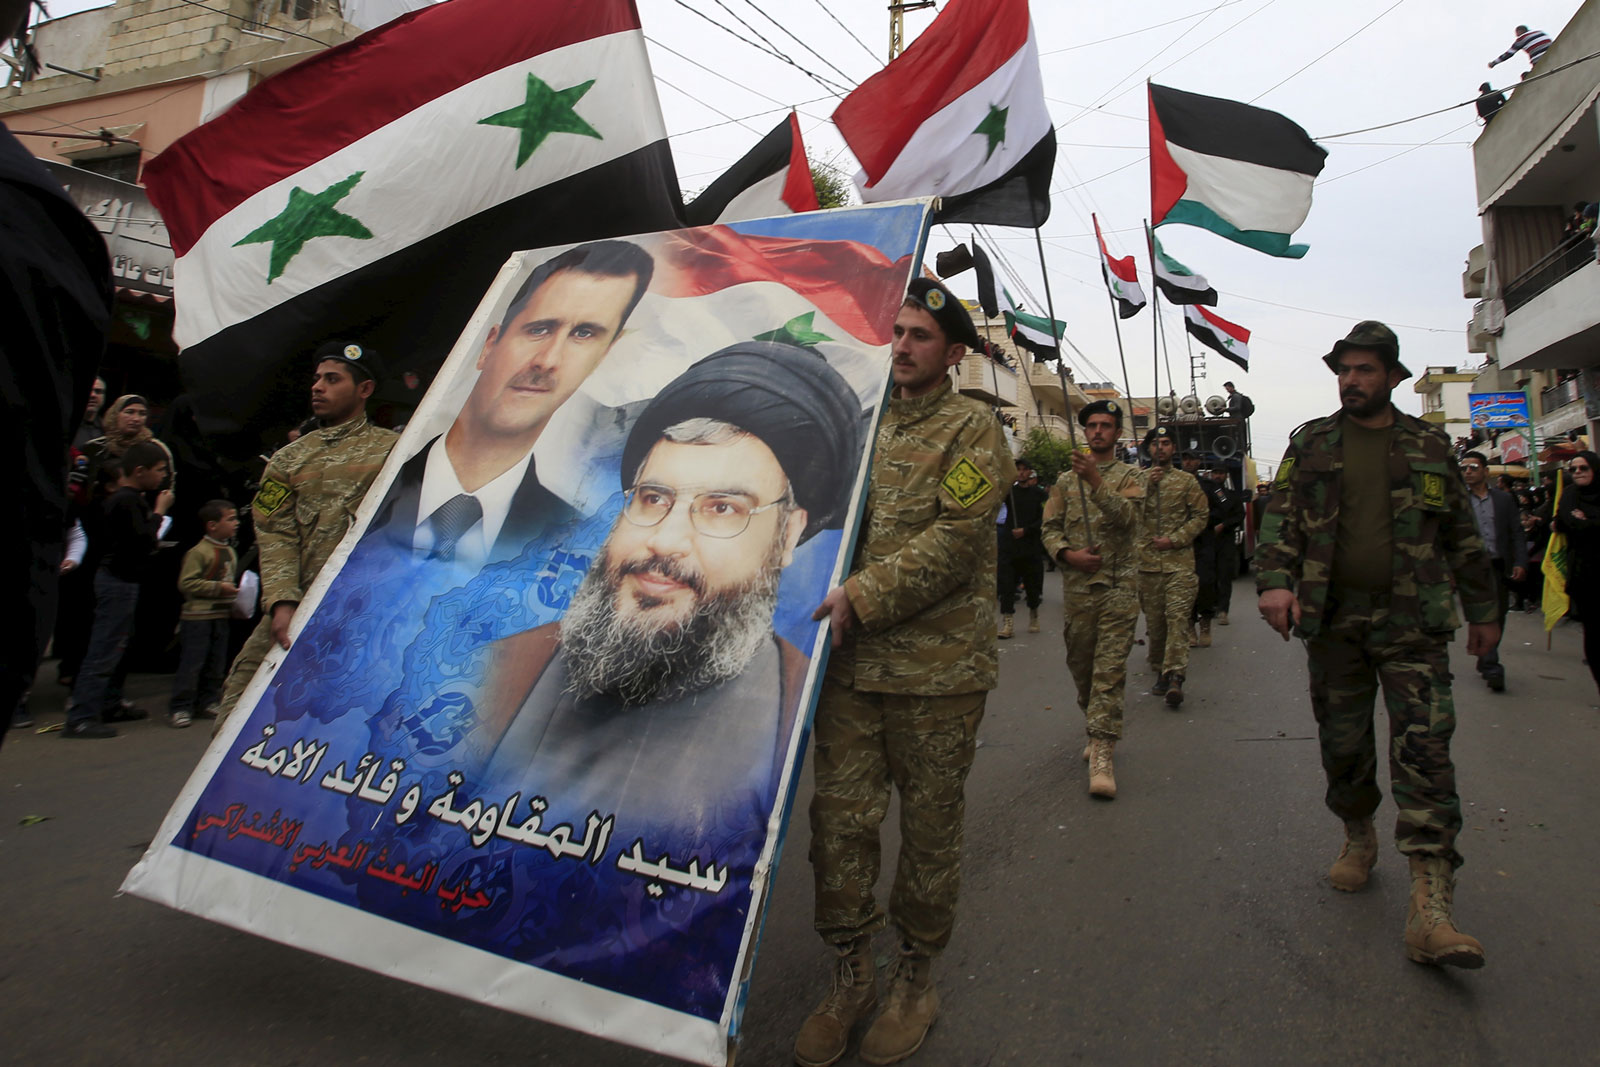 Members of the Arab Socialist Baath Party carry a picture depicting Syria's President Bashar al-Assad and Hezbollah leader Sayyed Hassan Nasrallah, Ansar village, Lebanon, March 2, 2016